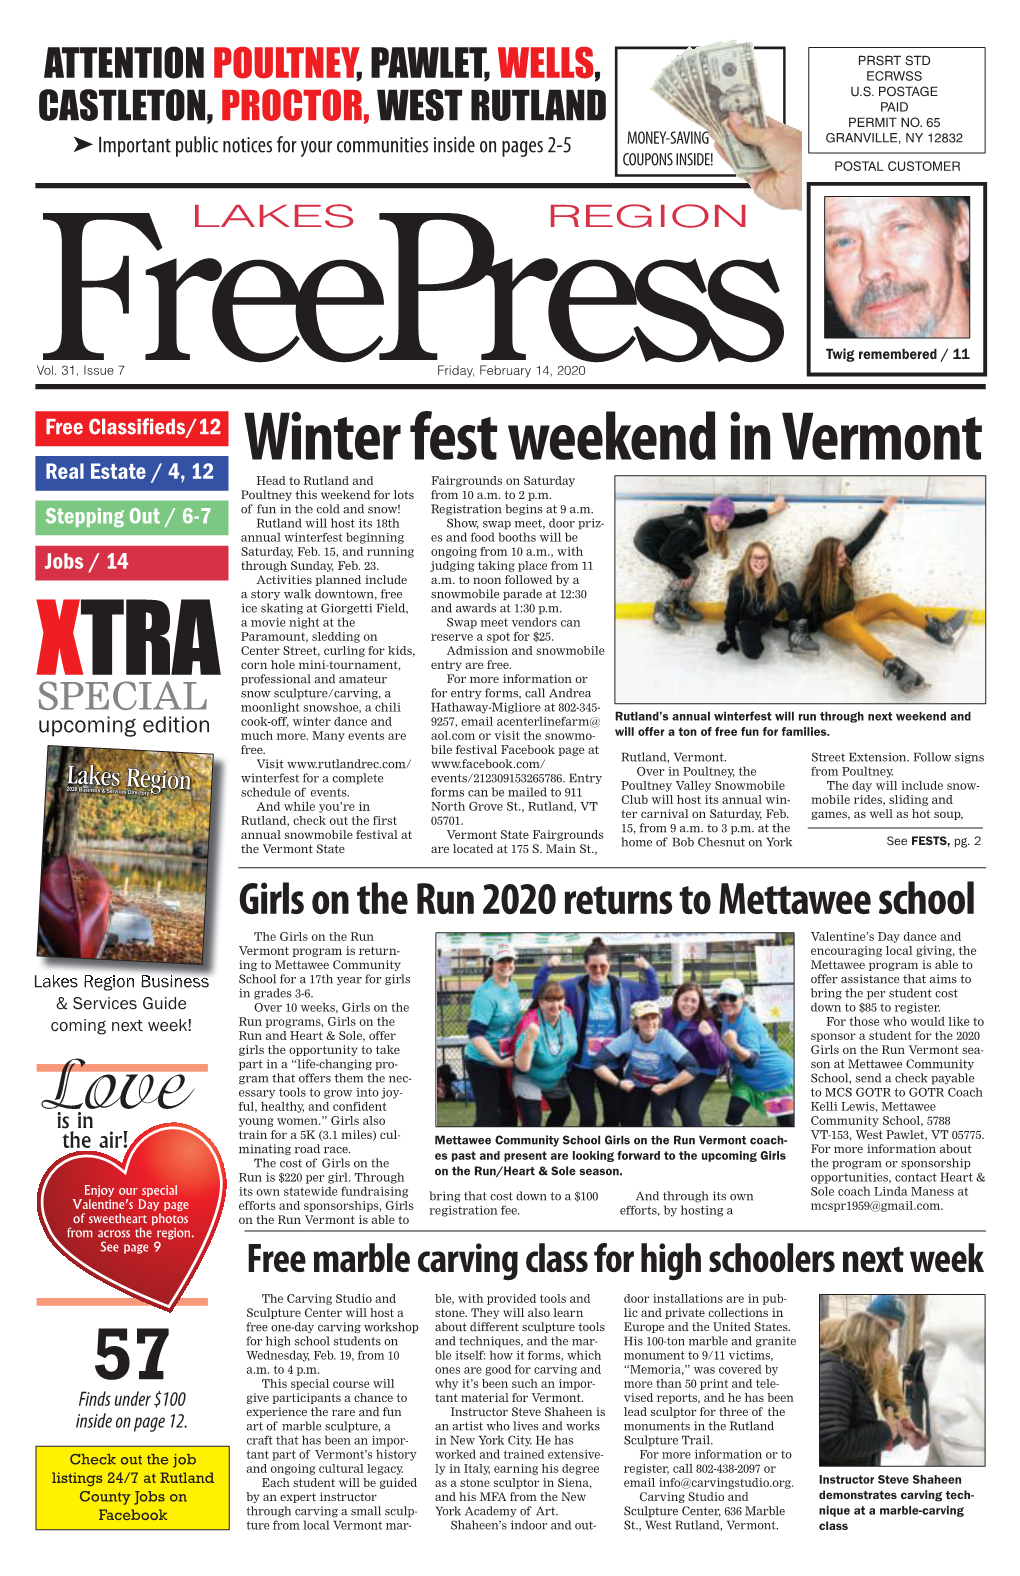 Winter Fest Weekend in Vermont Real Estate / 4, 12 Head to Rutland and Fairgrounds on Saturday Poultney This Weekend for Lots from 10 A.M